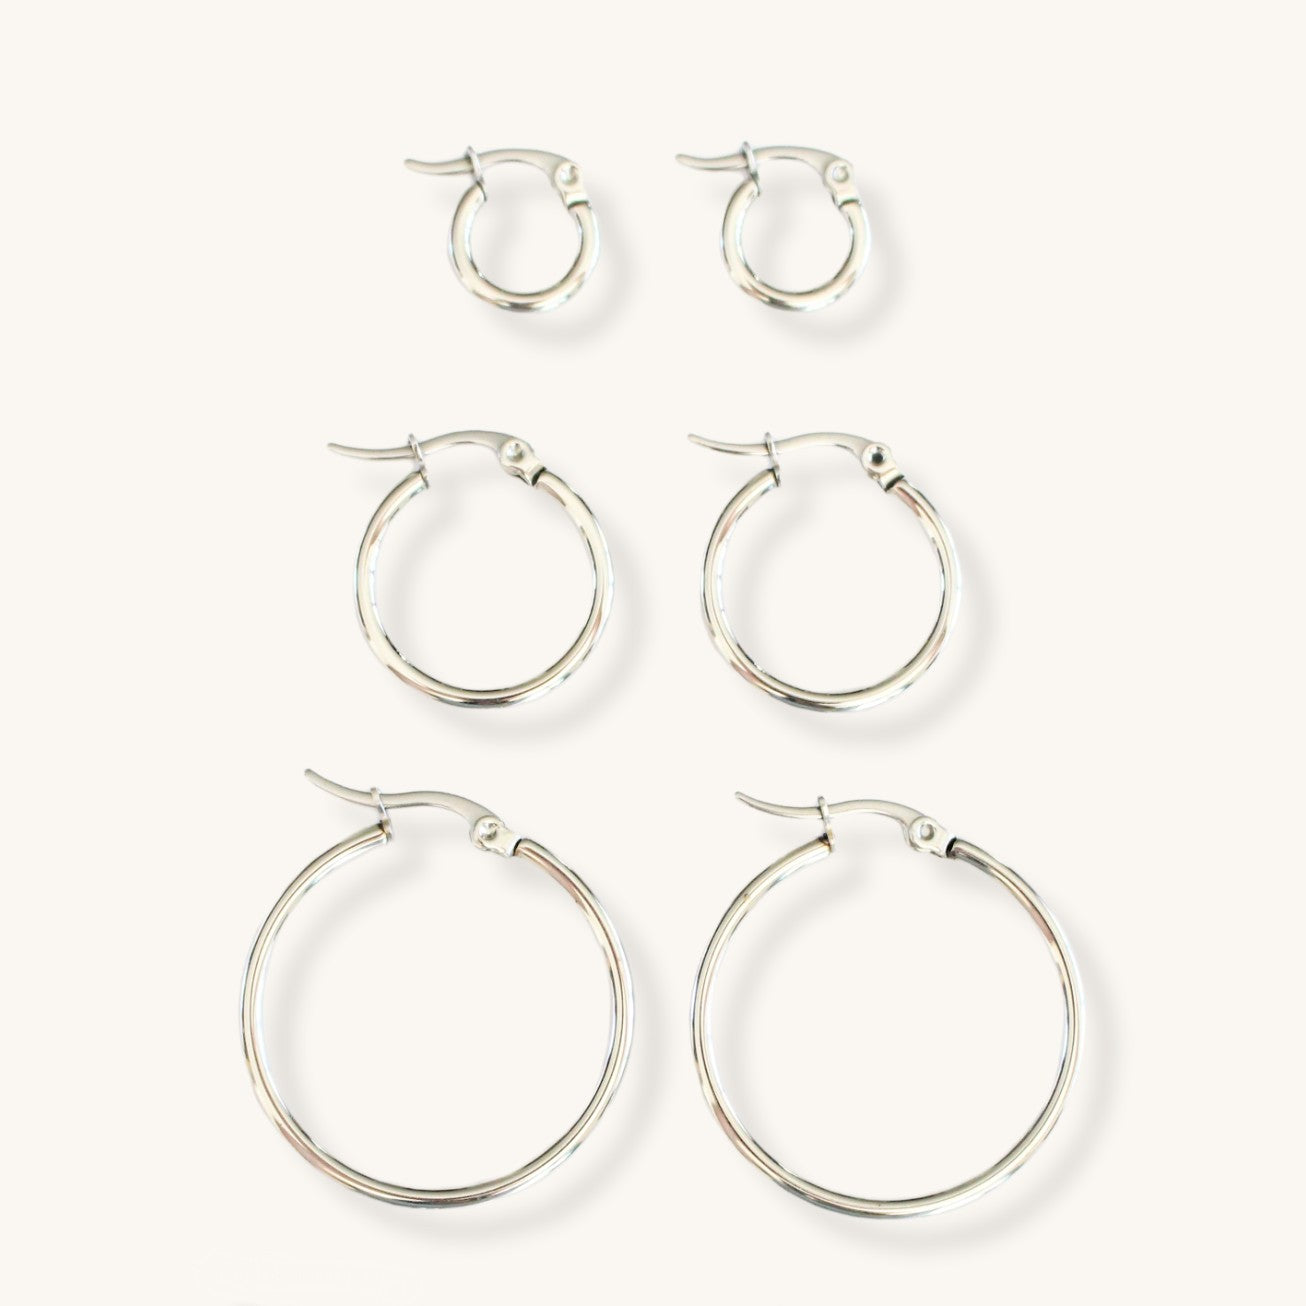 Several sizes of stainless steel earrings · Small silver hoop earrings · women's earrings round max creoles circle silver jewelry